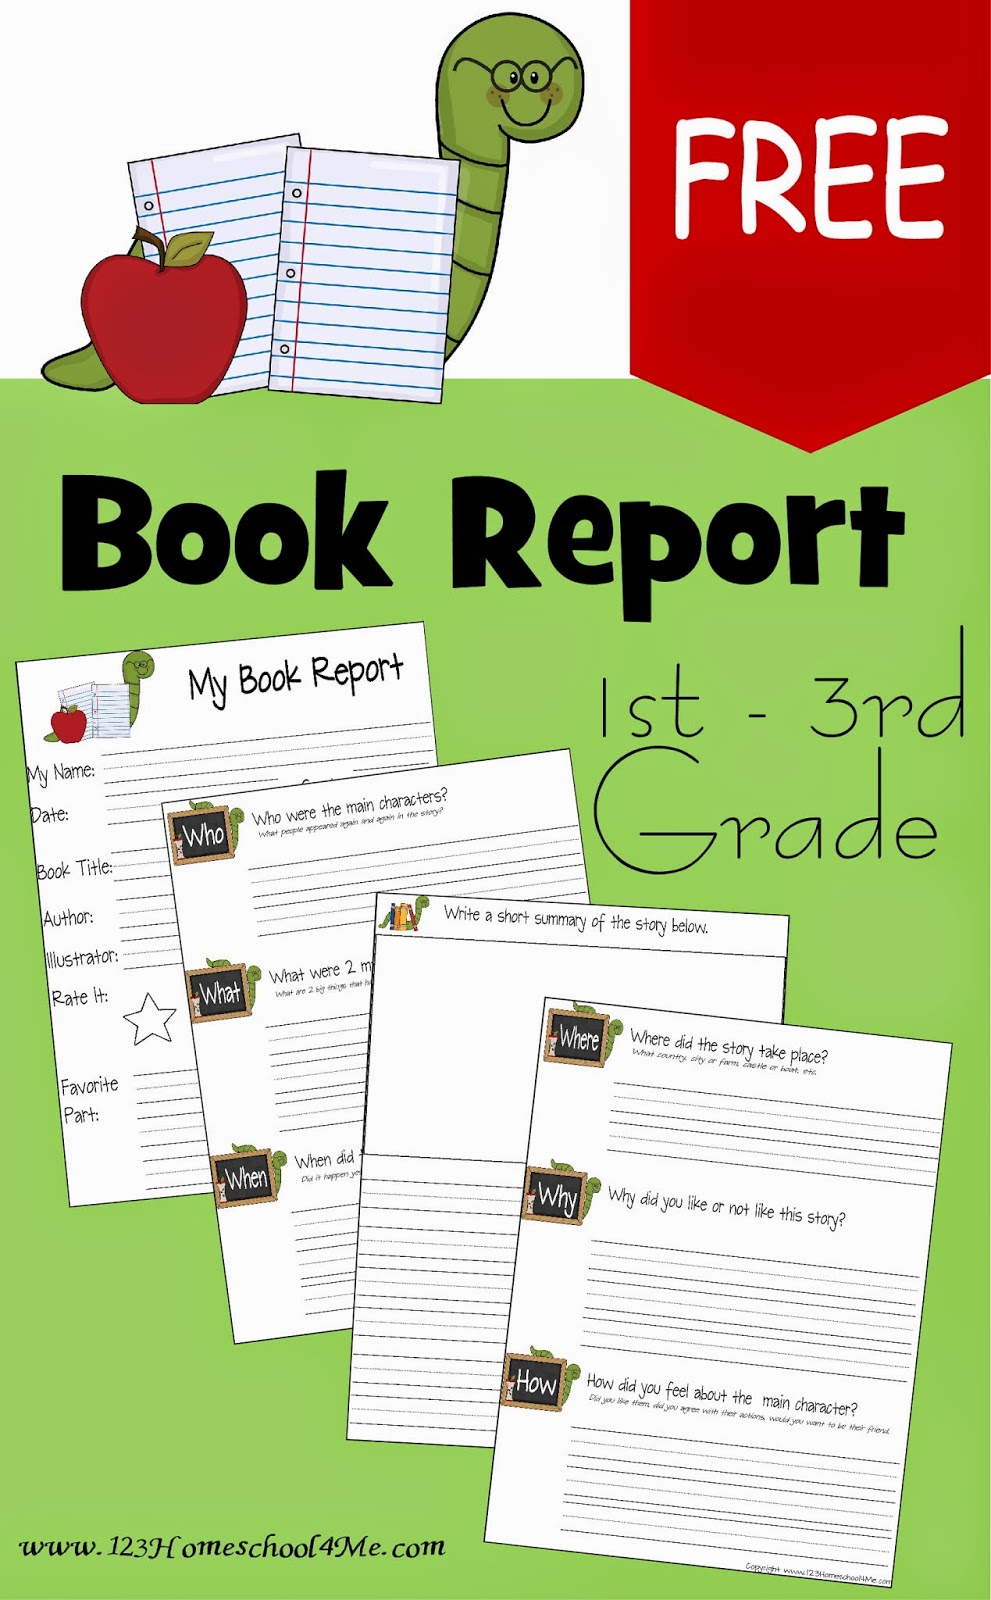 FREE Book Report Template - Educational Freebies With Regard To 2Nd Grade Book Report Template